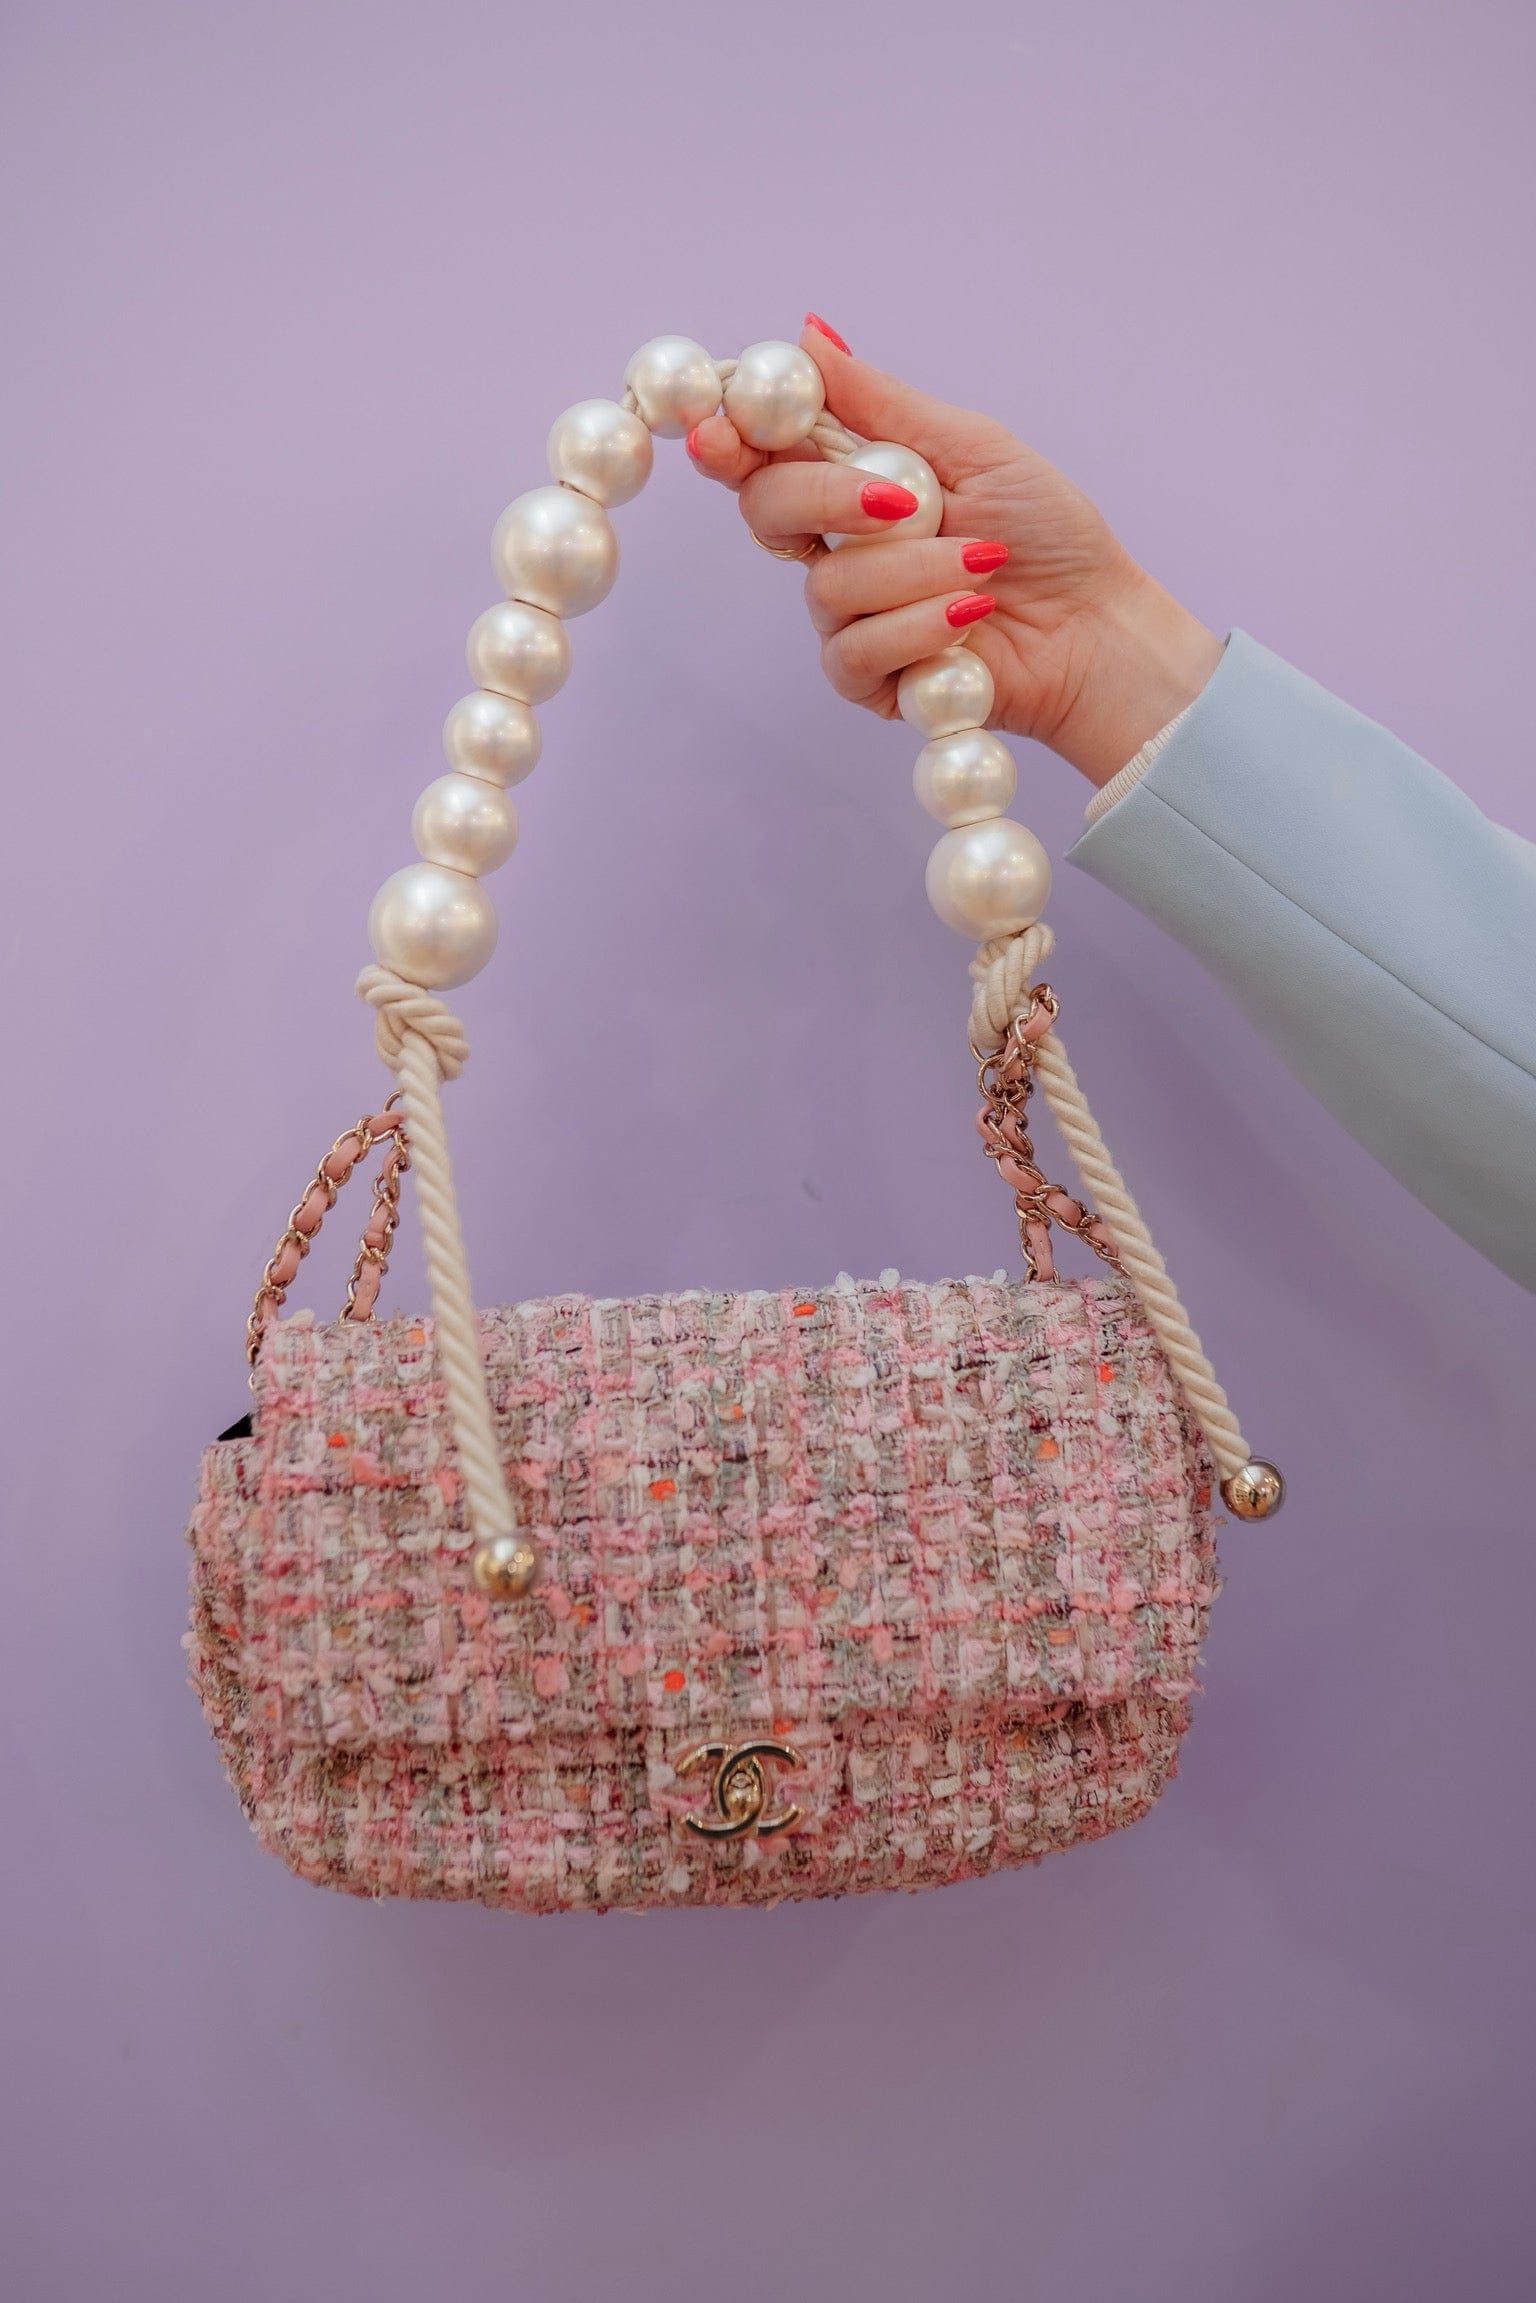 Chanel Pink Tweed Flap Bag With Pearl Detail - ADL1833